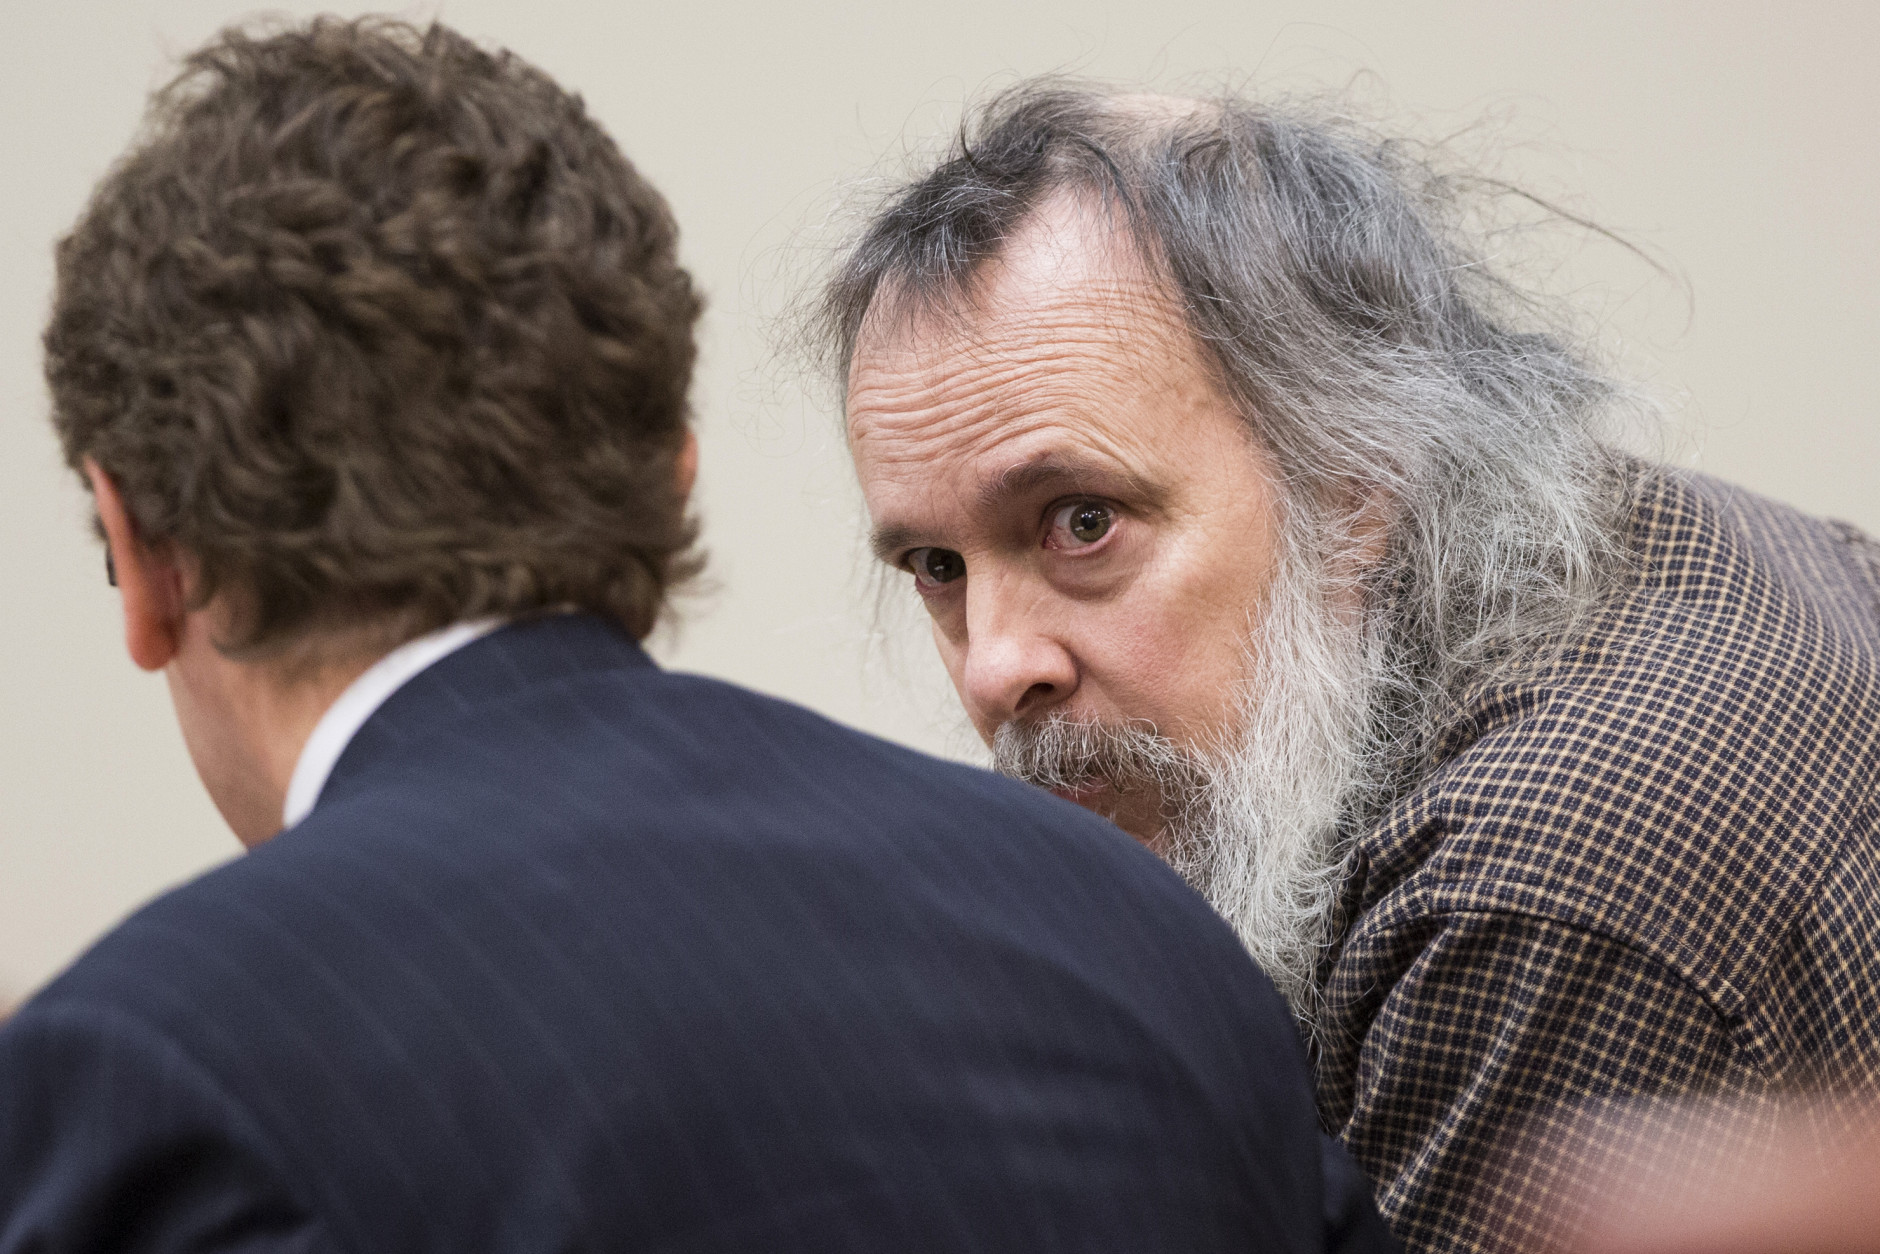 Charles Severance, right, talks with his attorney Joe King during his murder trial at the Fairfax County Circuit Court in Fairfax, Va., Friday, Oct. 16, 2015. Severance is accused of three murders over the course of a decade in Alexandria, Va. (AP Photo/Evan Vucci, Pool)